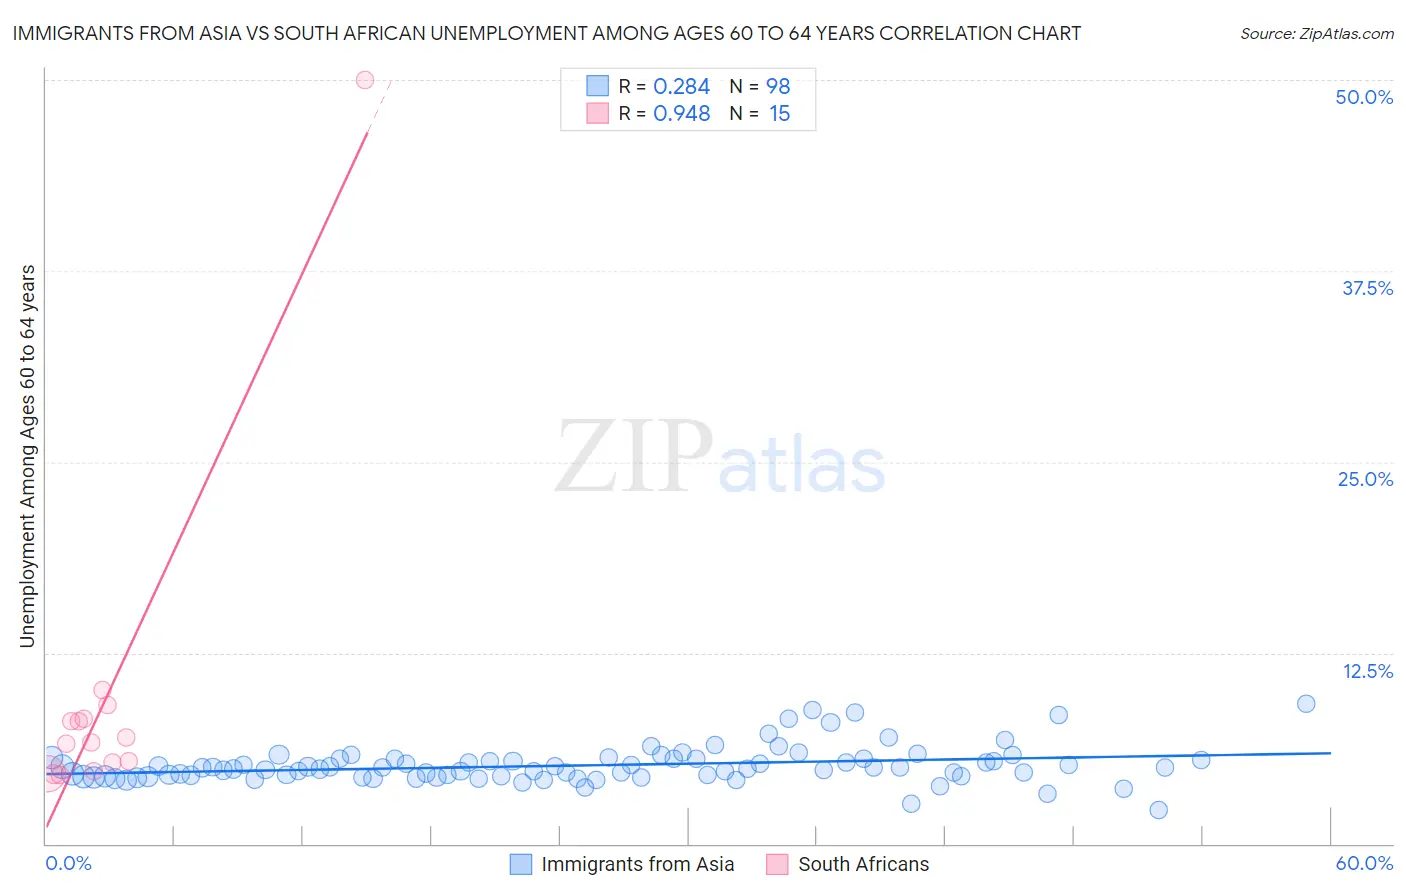 Immigrants from Asia vs South African Unemployment Among Ages 60 to 64 years